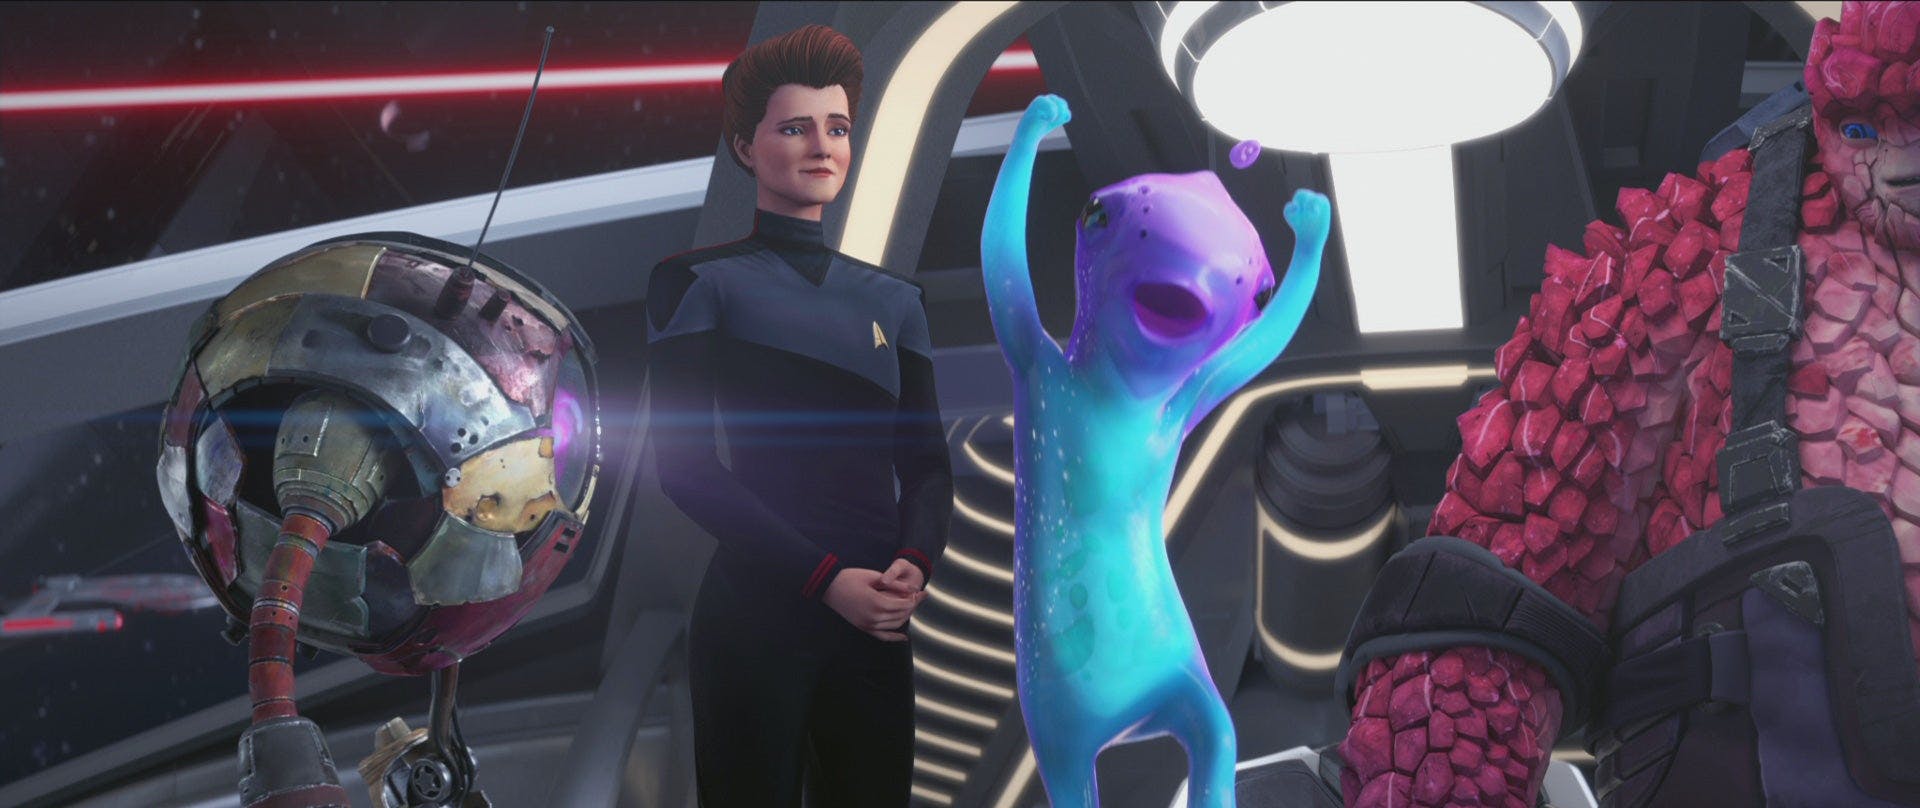 Murf jumps in cheer as Zero, Holo-Janeway, and Rok-Tahk surrounds him on Star Trek: Prodigy